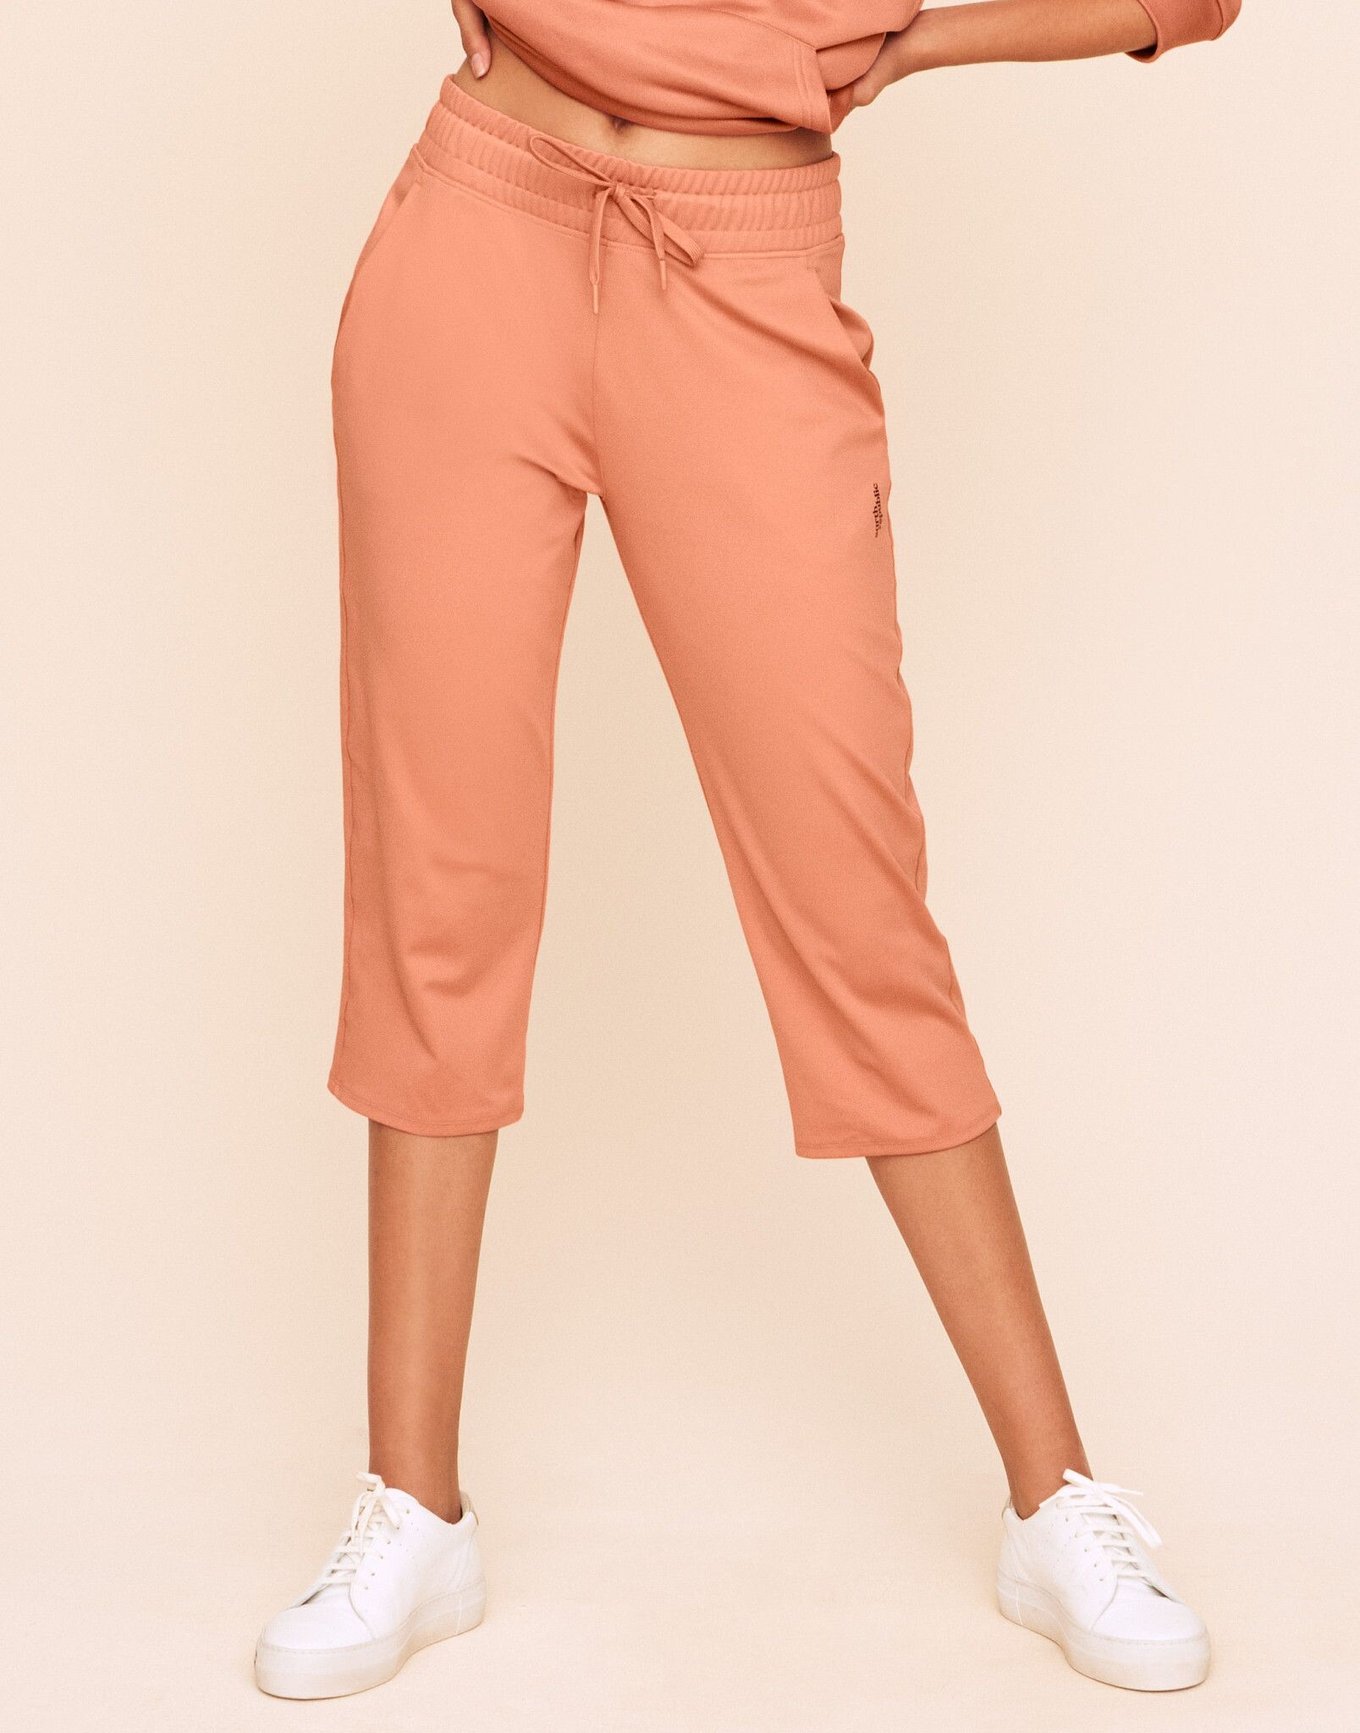 Jaelyn Cropped Pant Placement Pink Cropped pant length, XXS-XL